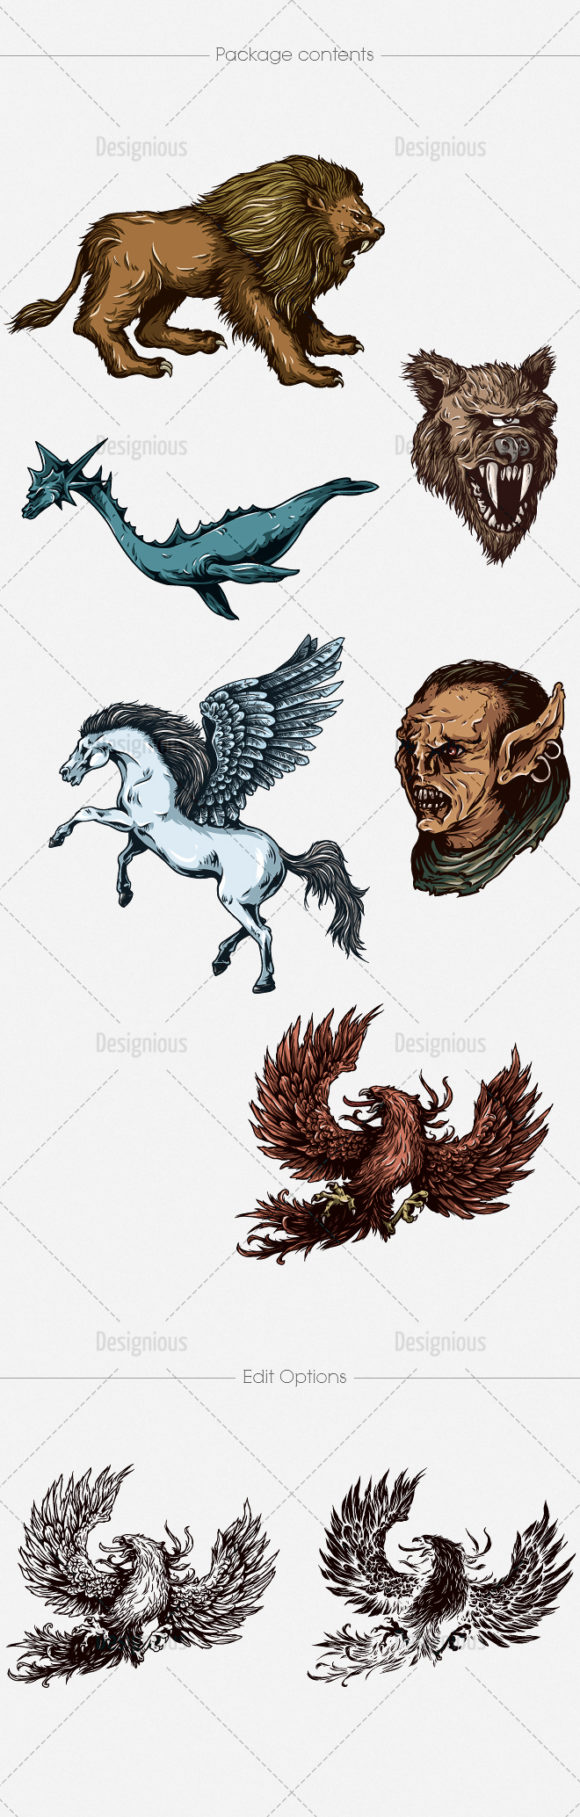 Mythical Creatures Vector Pack 6 2